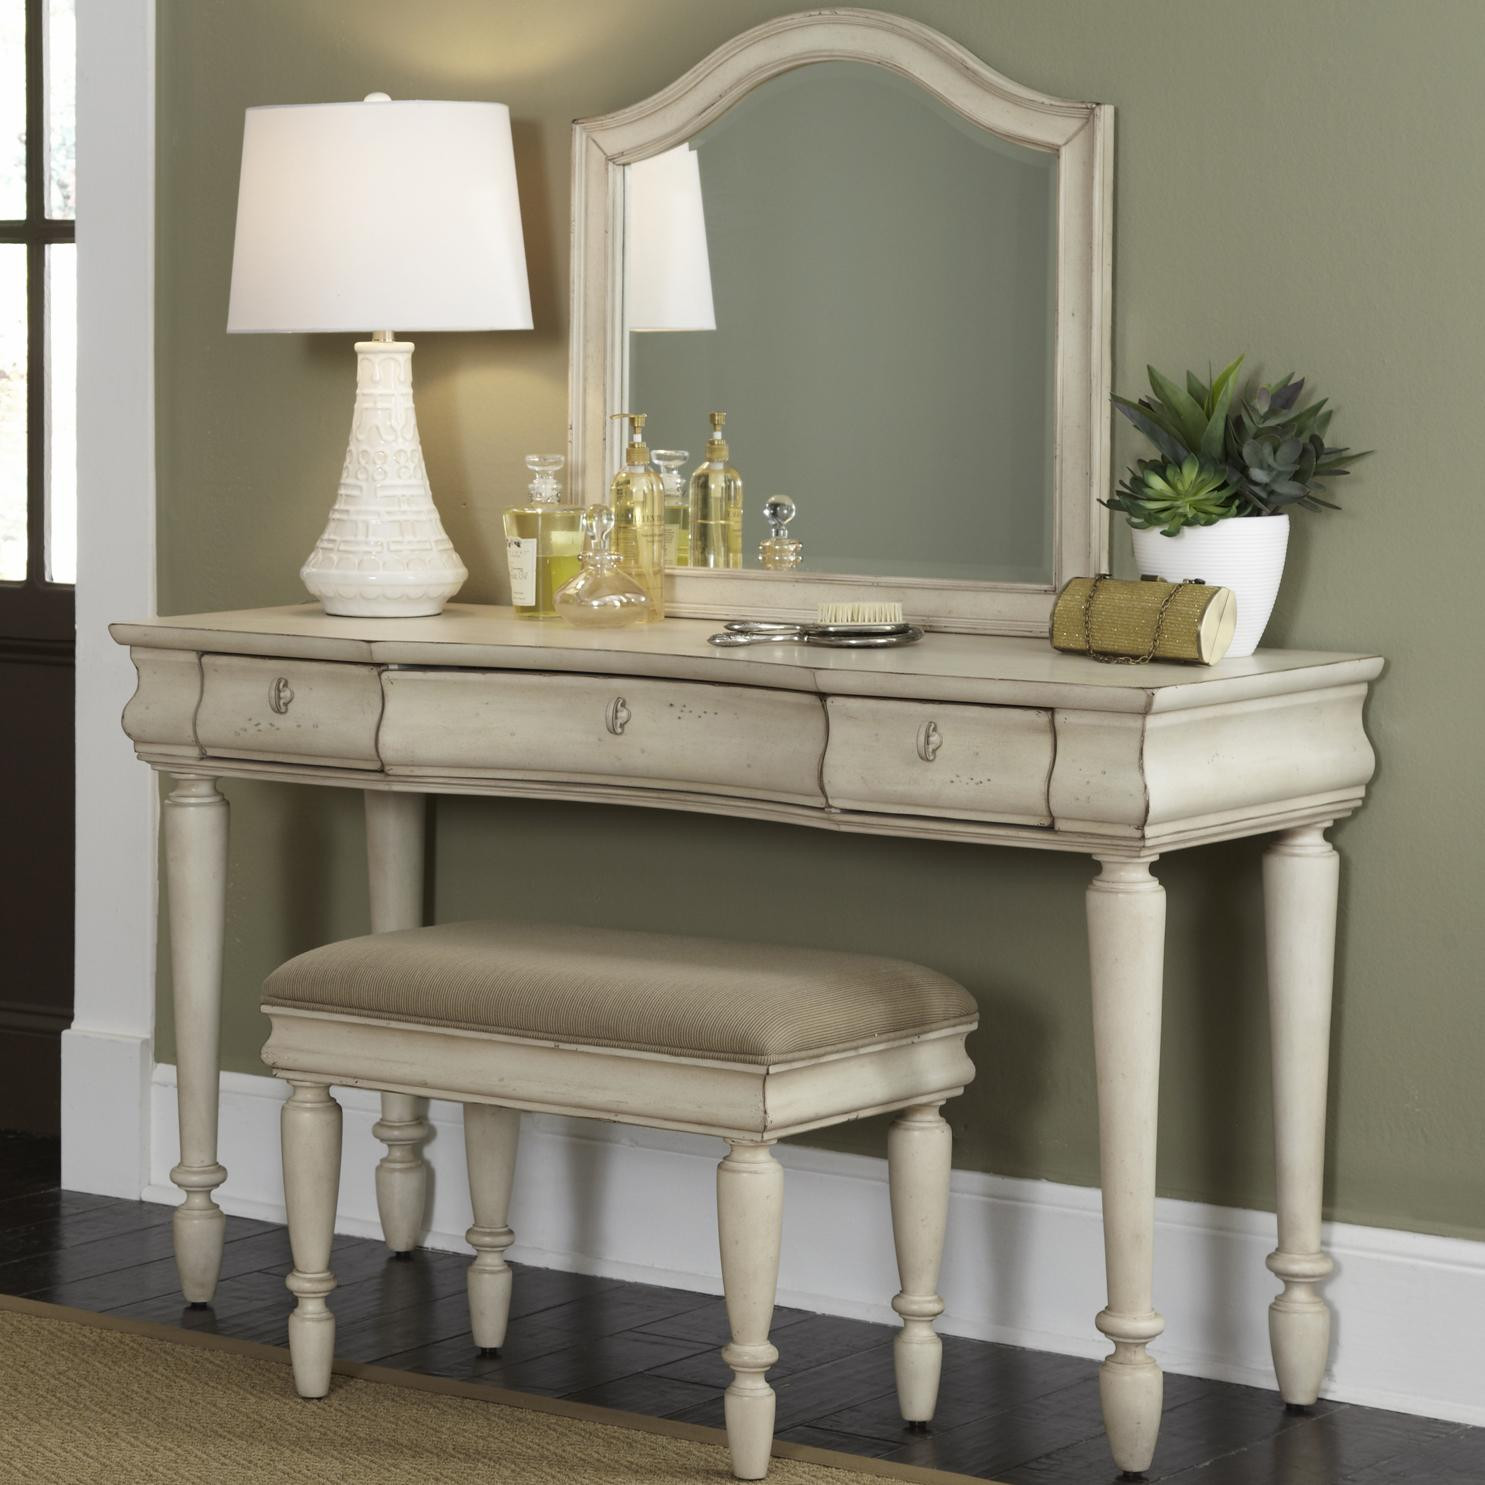 Rustic Bedroom Vanity
 Liberty Furniture Rustic Traditions Vanity Set with Turned